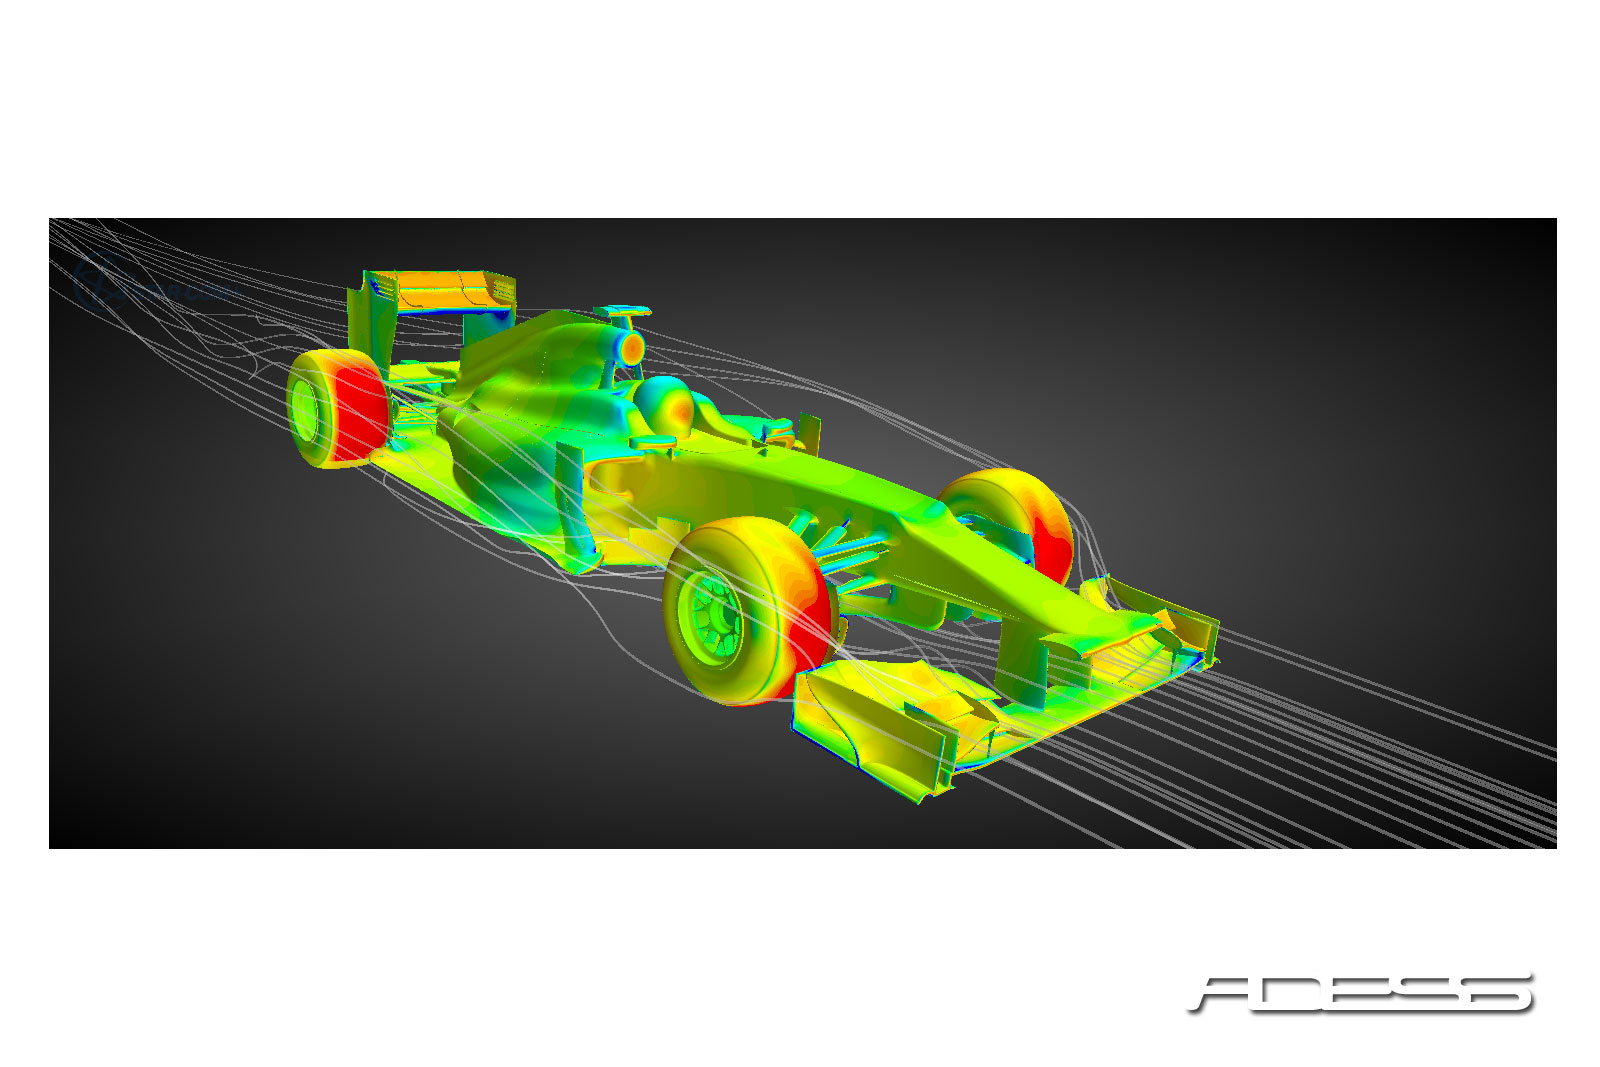 Pressure field and streamlines over a Formula 1 car